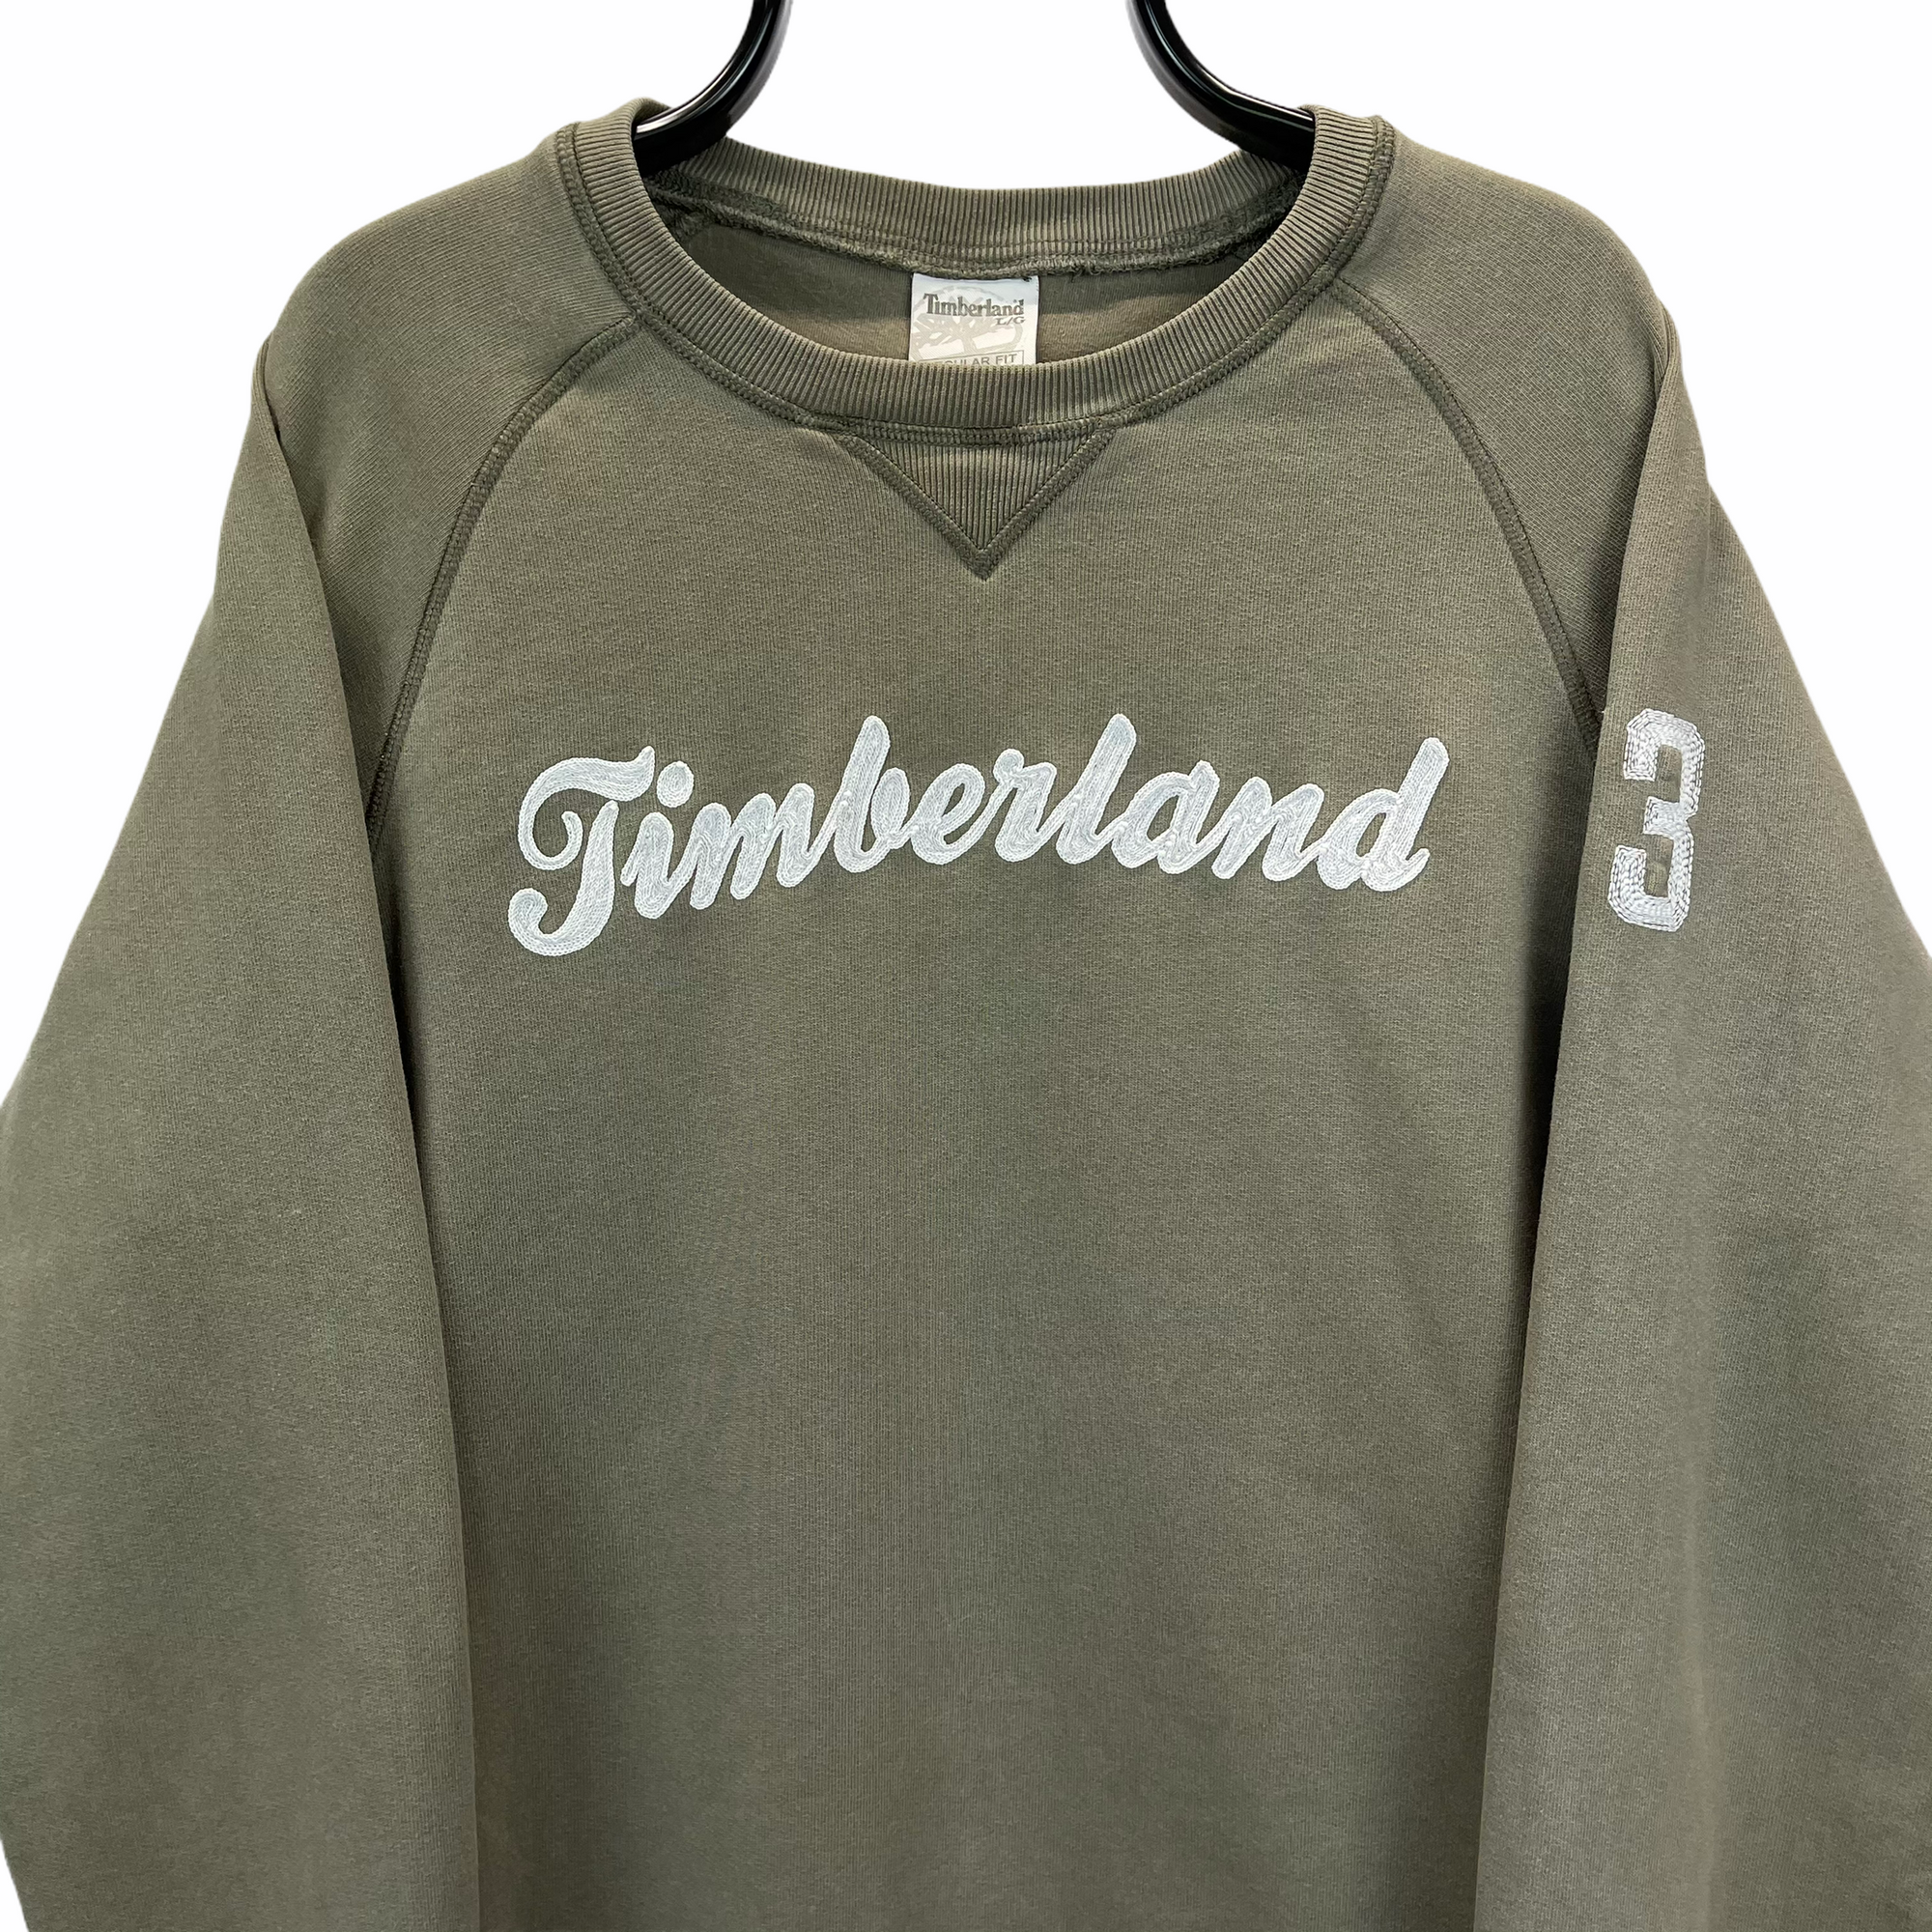 VINTAGE TIMBERLAND SPELLOUT SWEATSHIRT IN OLIVE GREEN - MEN'S LARGE/WOMEN'S XL